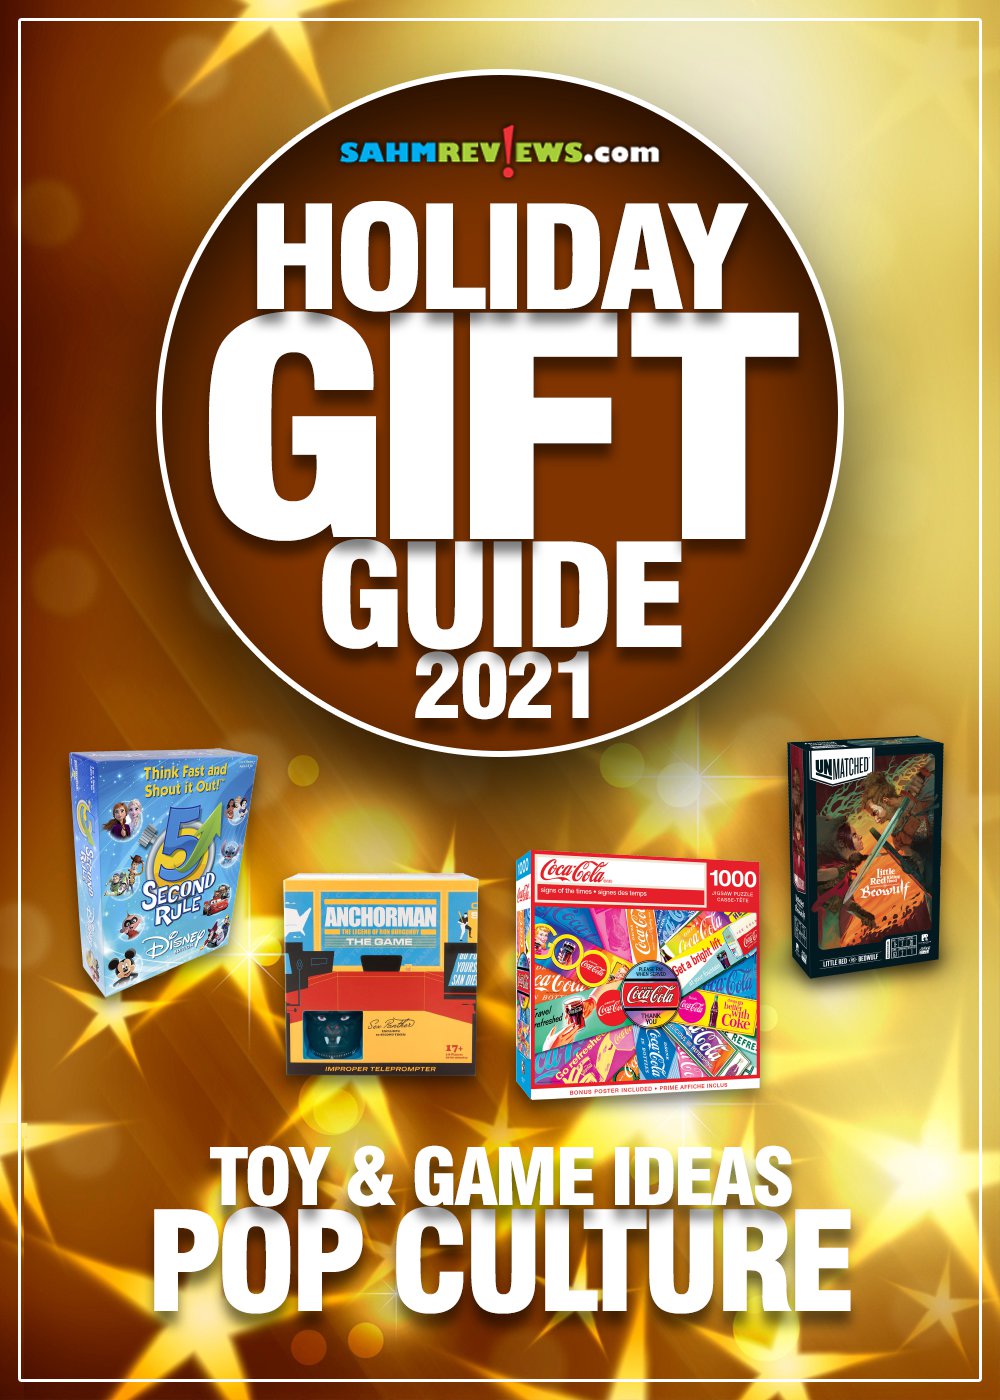 Fads come and go, but gifts rooted in pop culture stand the test of time! Here's this year's list of toy & game ideas! - SahmReviews.com